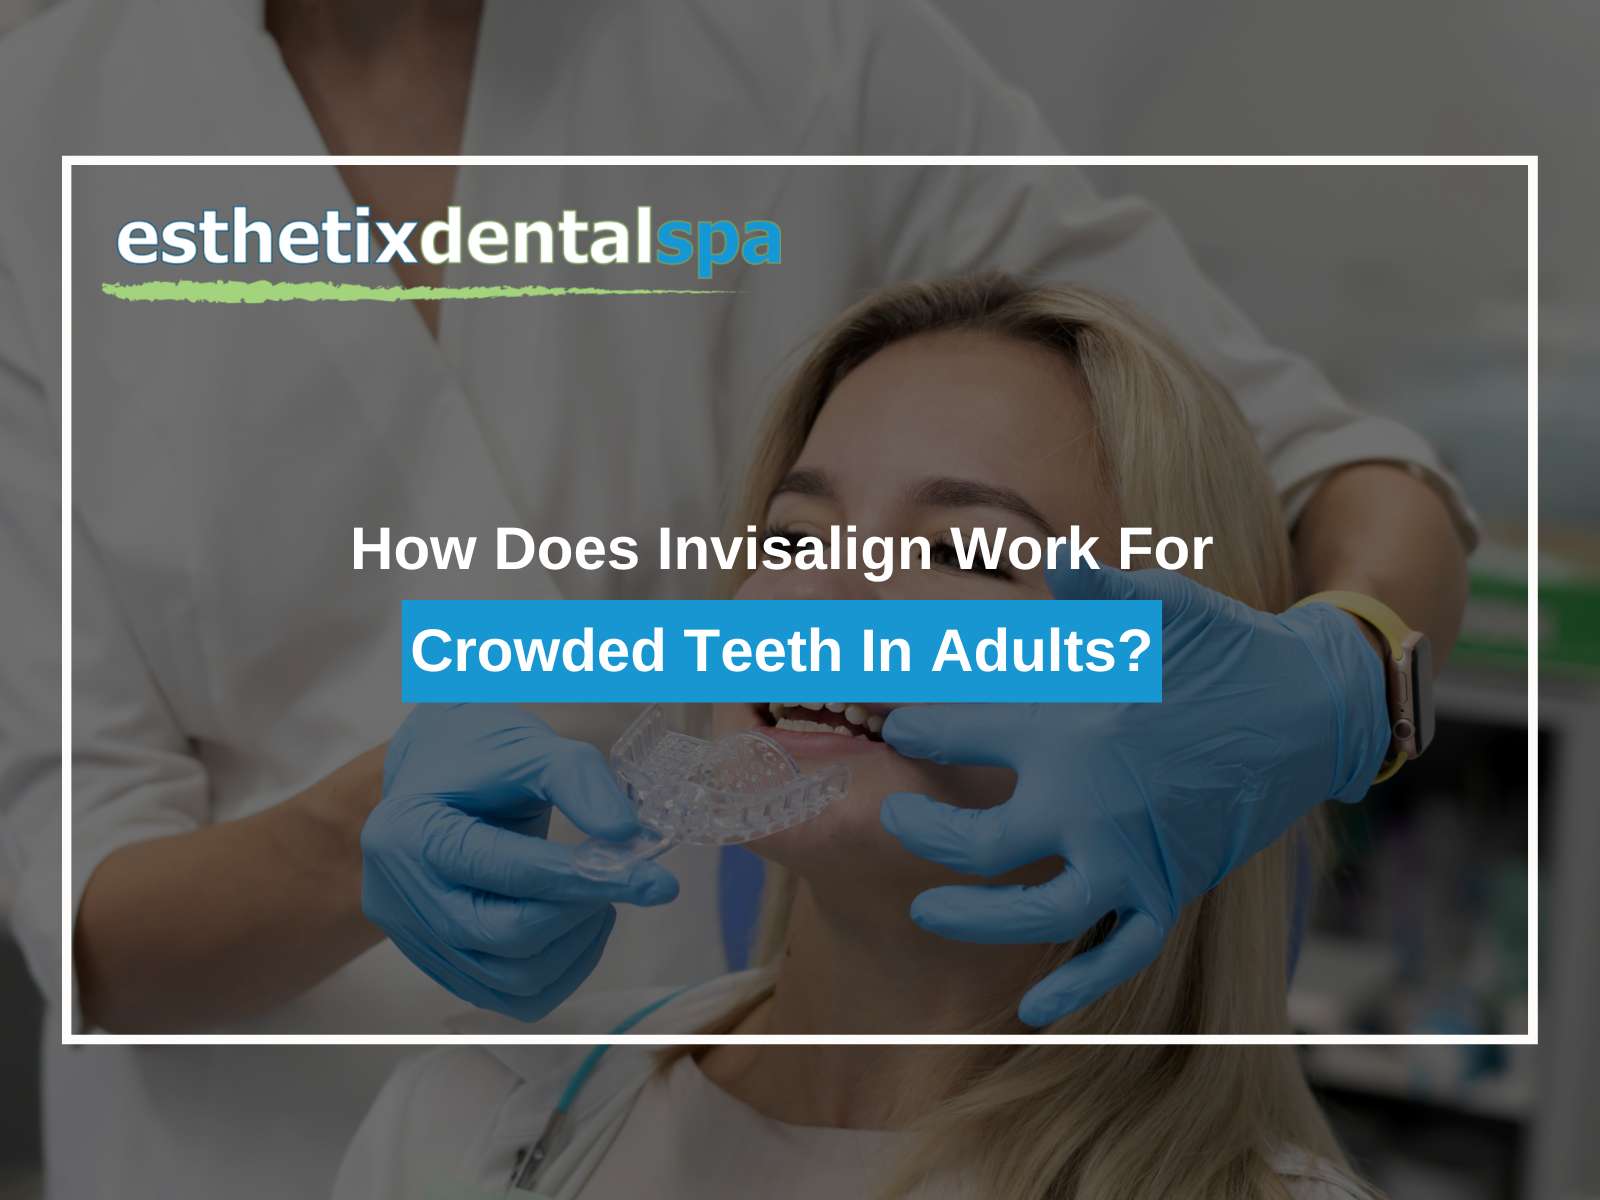 How Does Invisalign Work For Crowded Teeth In Adults